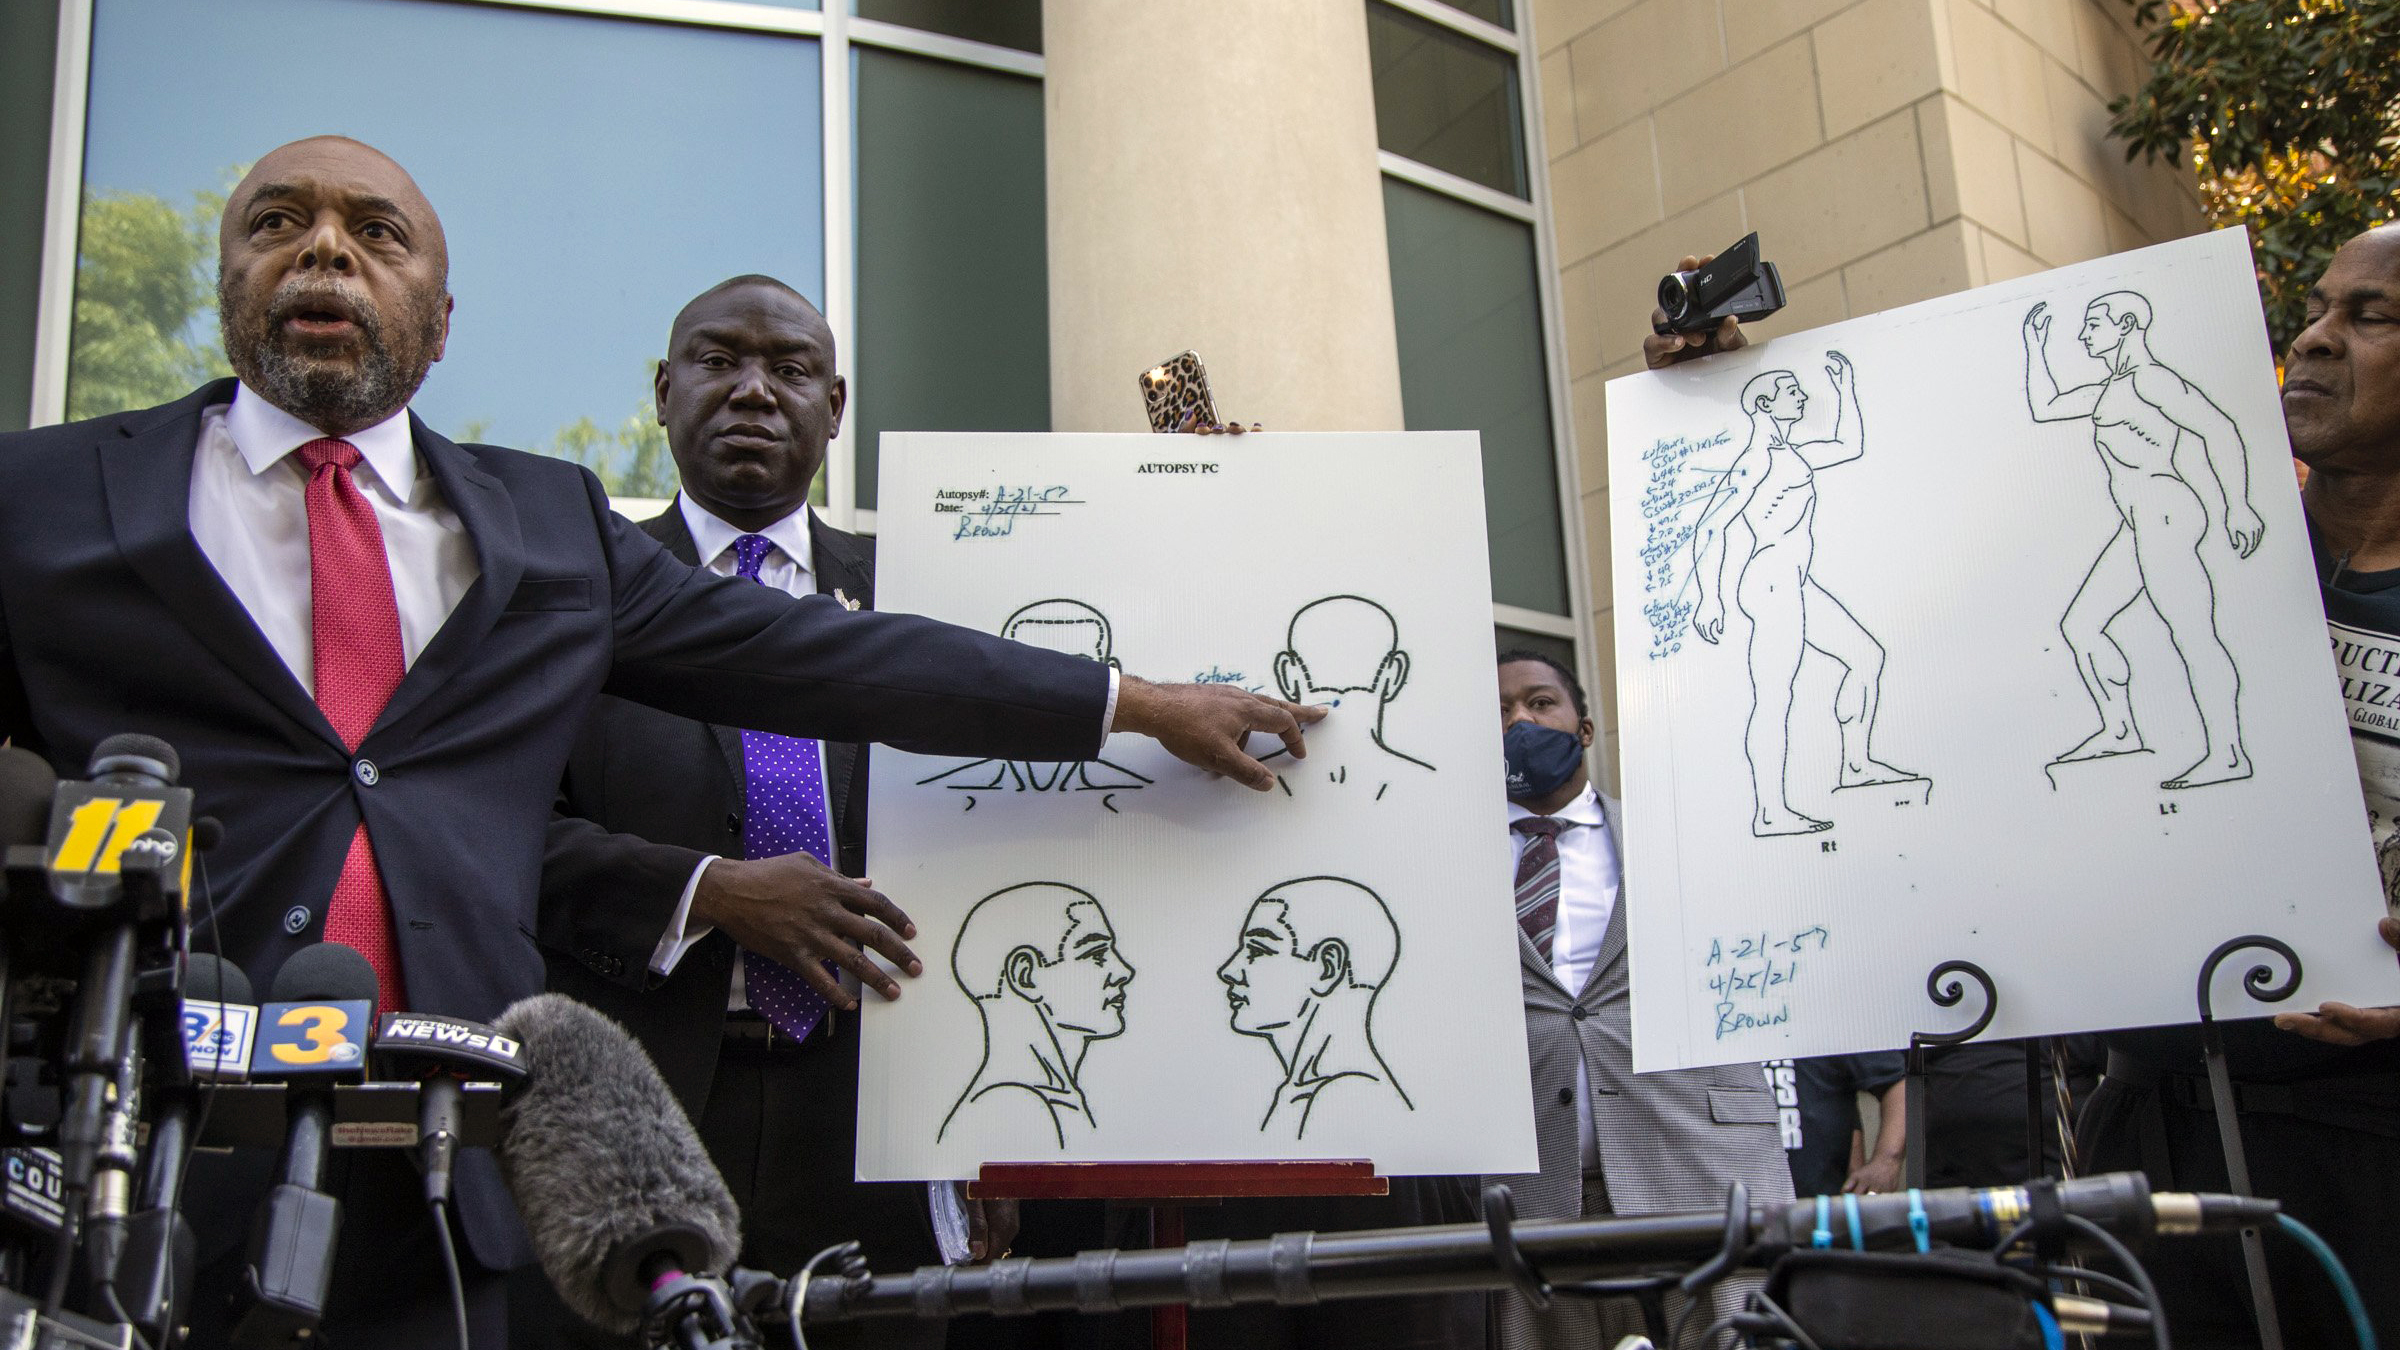 Attorneys for the family of Andrew Brown Jr., Wayne Kendall, left, and Ben Crump hold a news conference Tuesday, April 27, 2021 outside the Pasquotank County Public safety building in Elizabeth City, N.C., to announce results of the autopsy they commissioned. The attorneys say an independent autopsy shows that Brown, a Black man, was shot five times, including in the back of the head. Brown was shot Wednesday by deputies serving drug-related search and arrest warrant. (Travis Long/The News & Observer via AP)